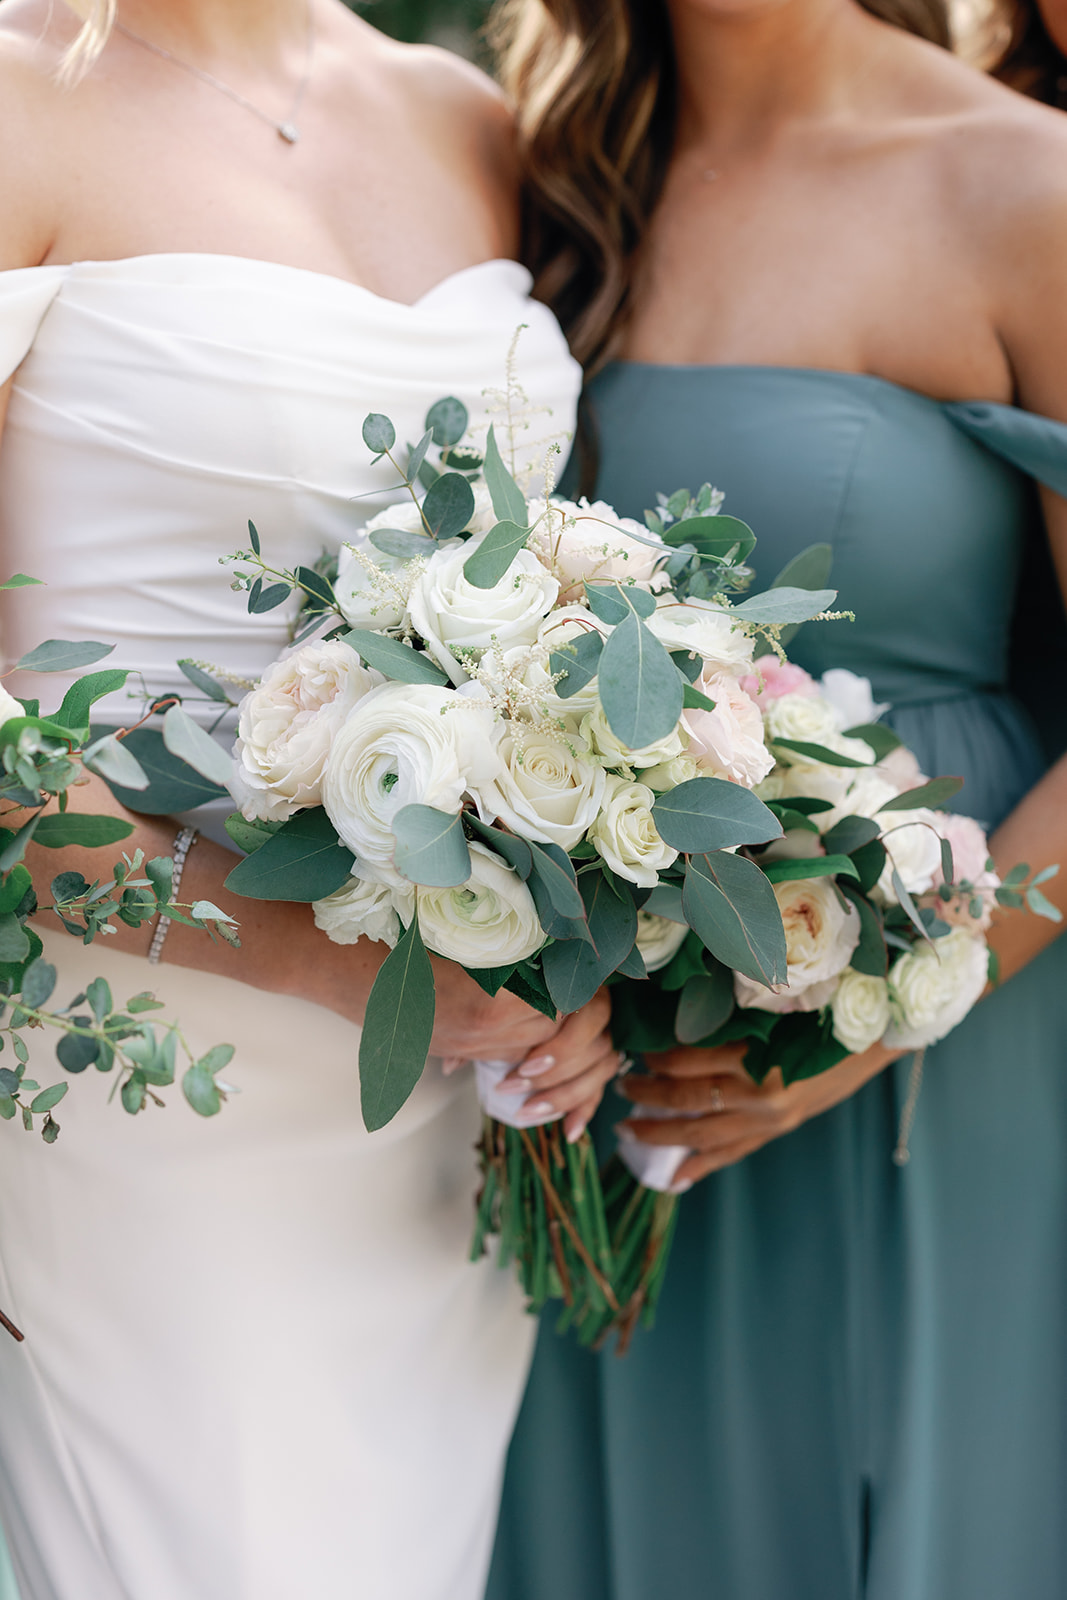 Details of a bride standing with a bridesmaid holding their matching white rose bouquets